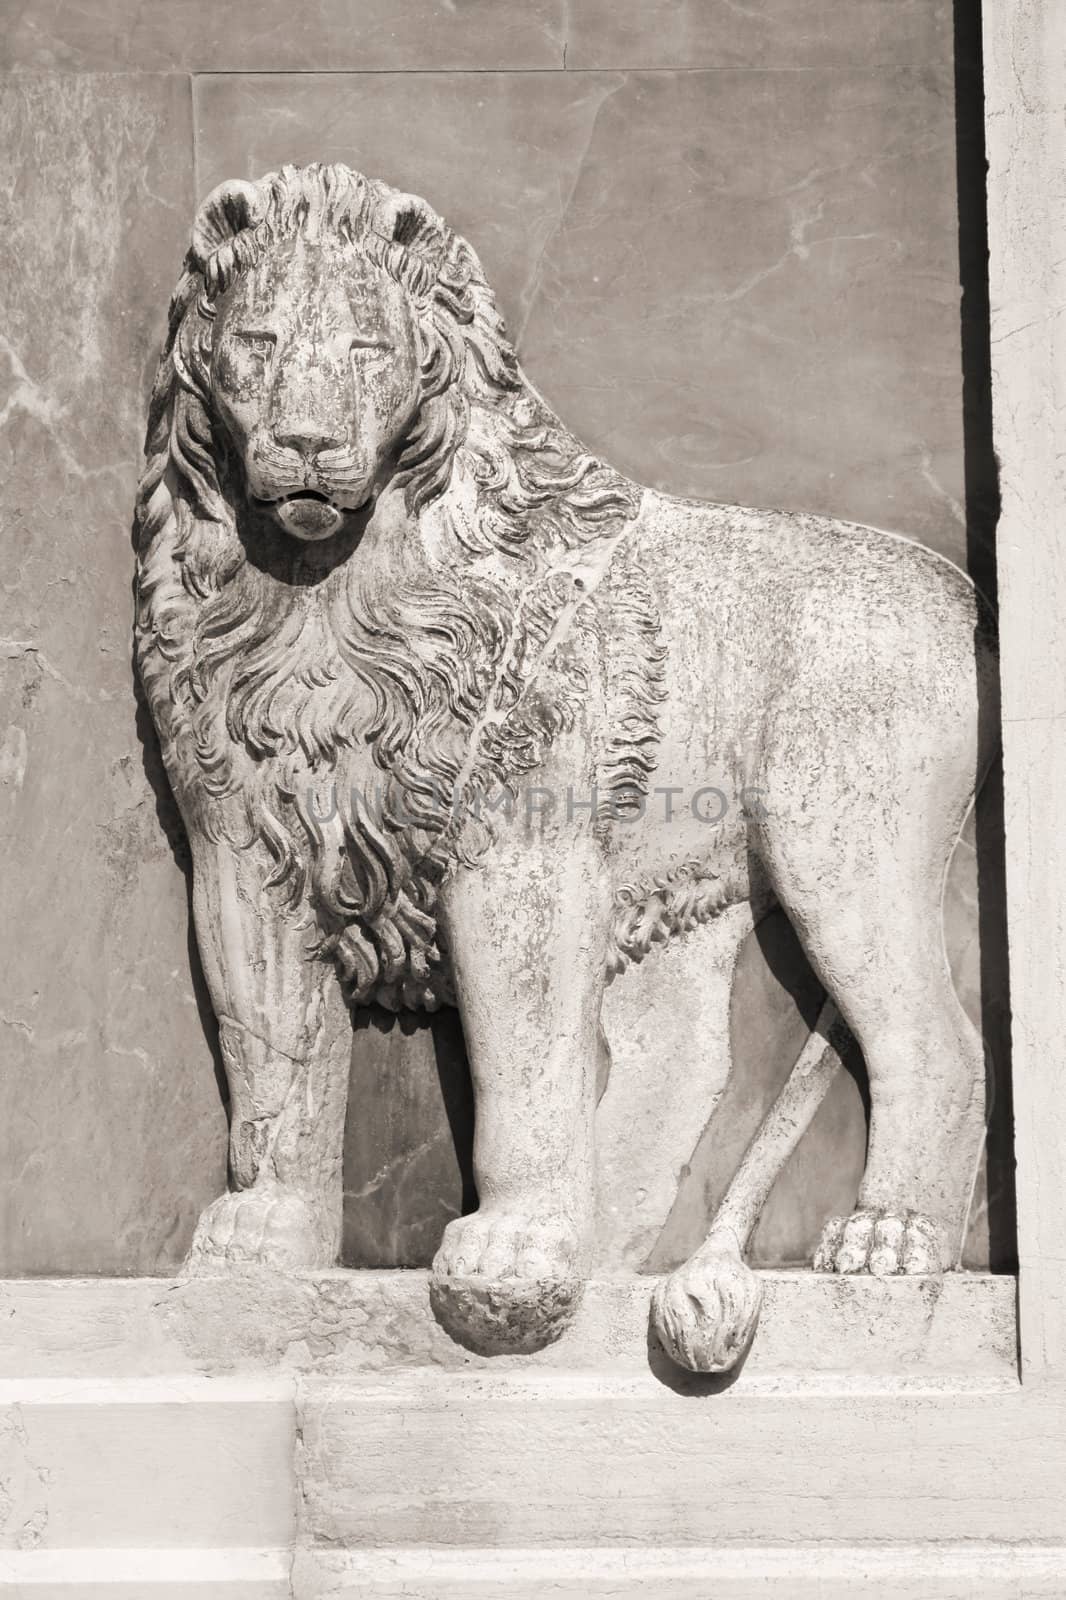 Lion bas relief sculpture in Venice, Italy